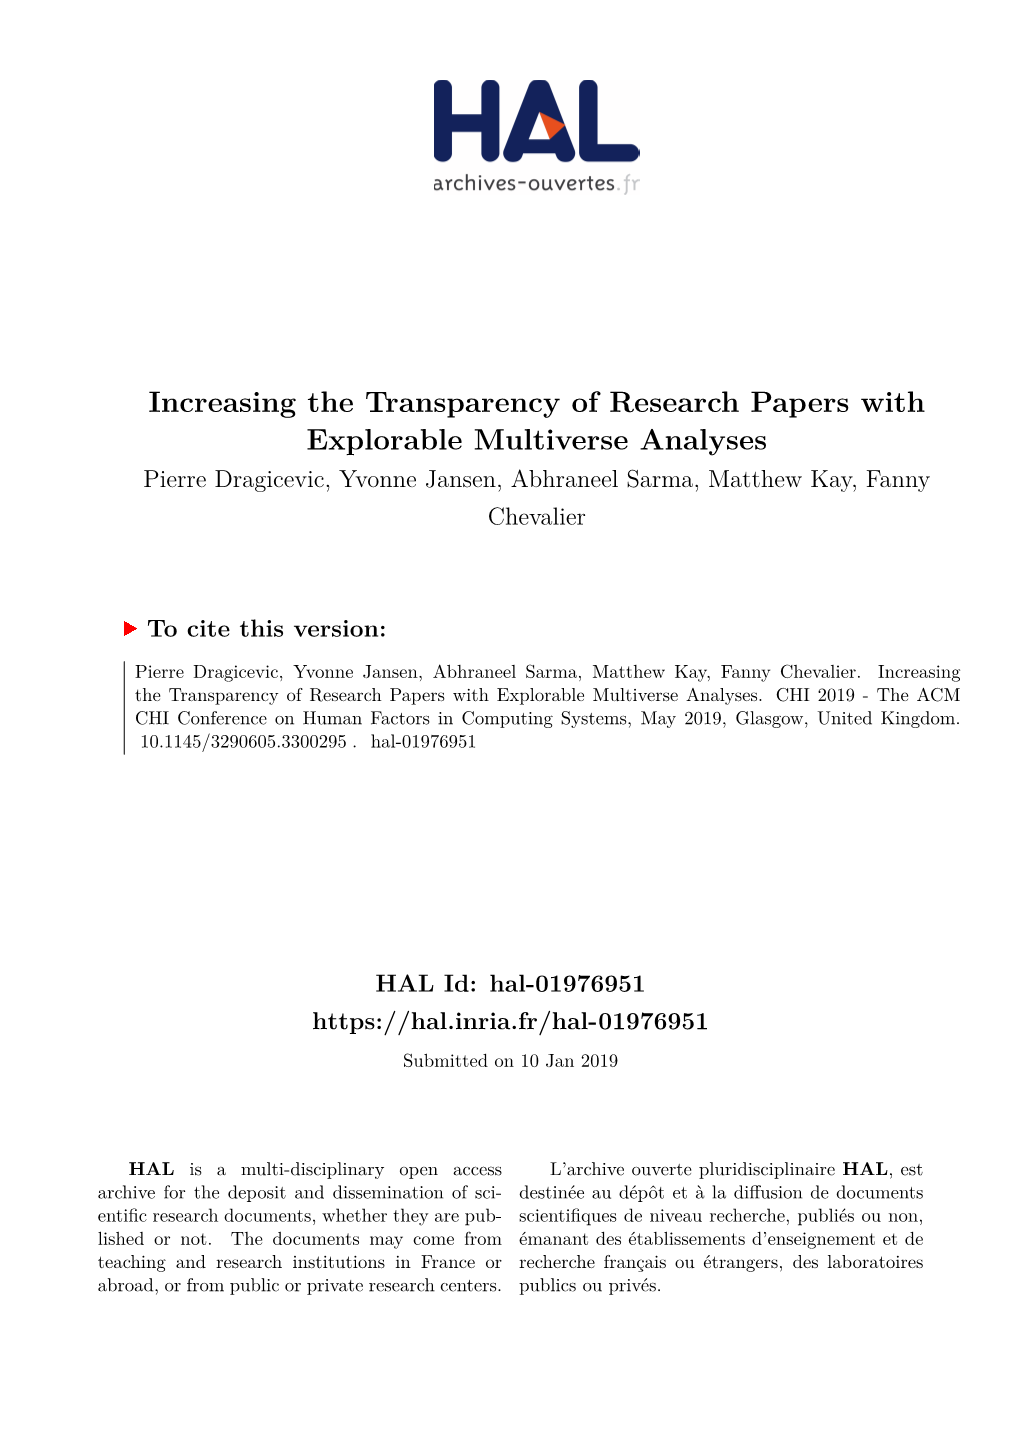 Increasing the Transparency of Research Papers with Explorable Multiverse Analyses Pierre Dragicevic, Yvonne Jansen, Abhraneel Sarma, Matthew Kay, Fanny Chevalier